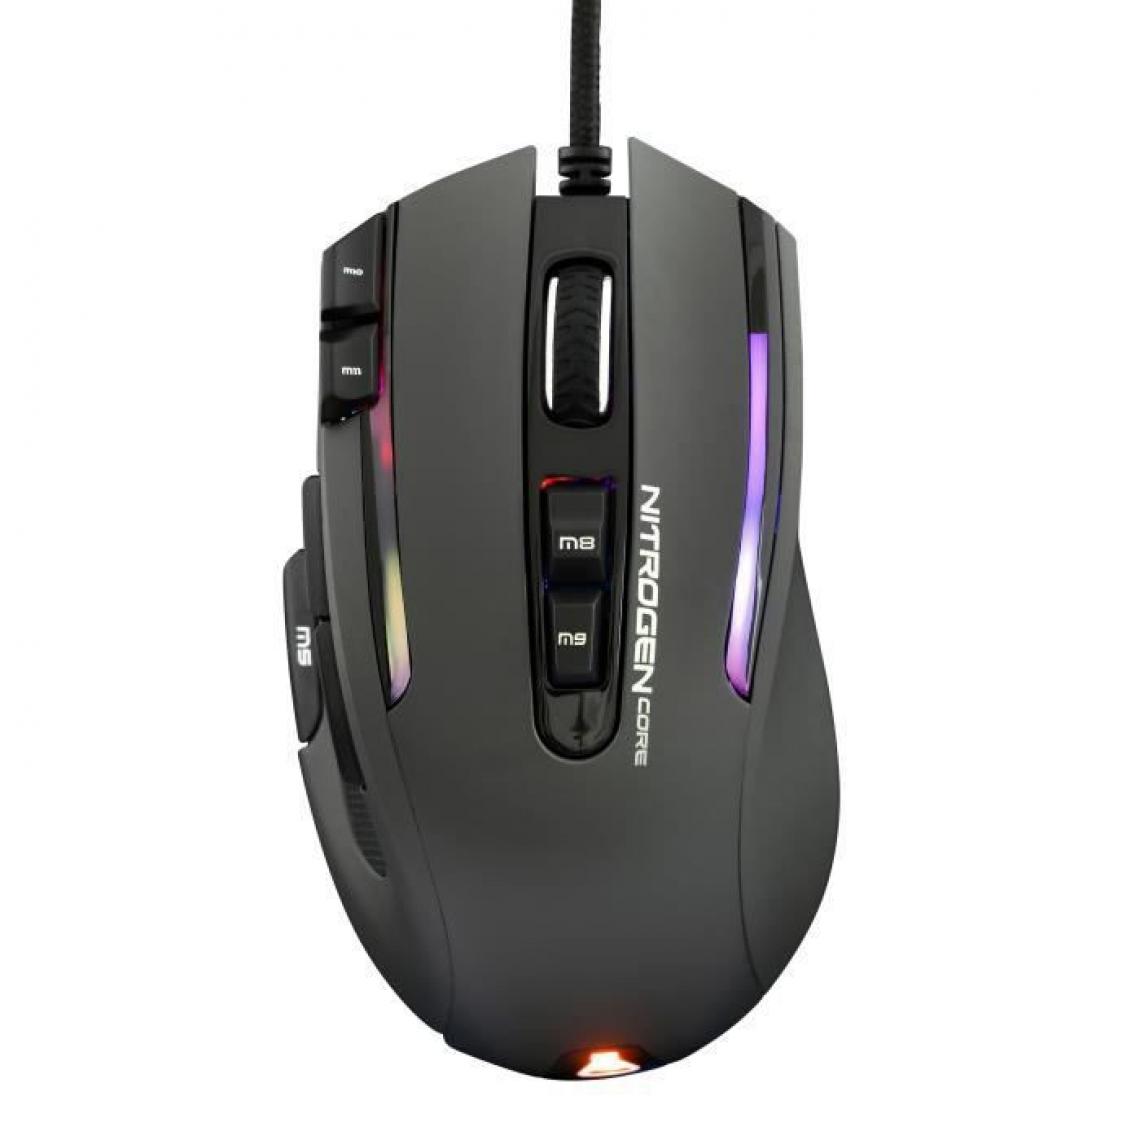 The G-Lab - THE G-LAB Souris Gaming RGB - 10000 DPI - Programmable - Grise - Souris